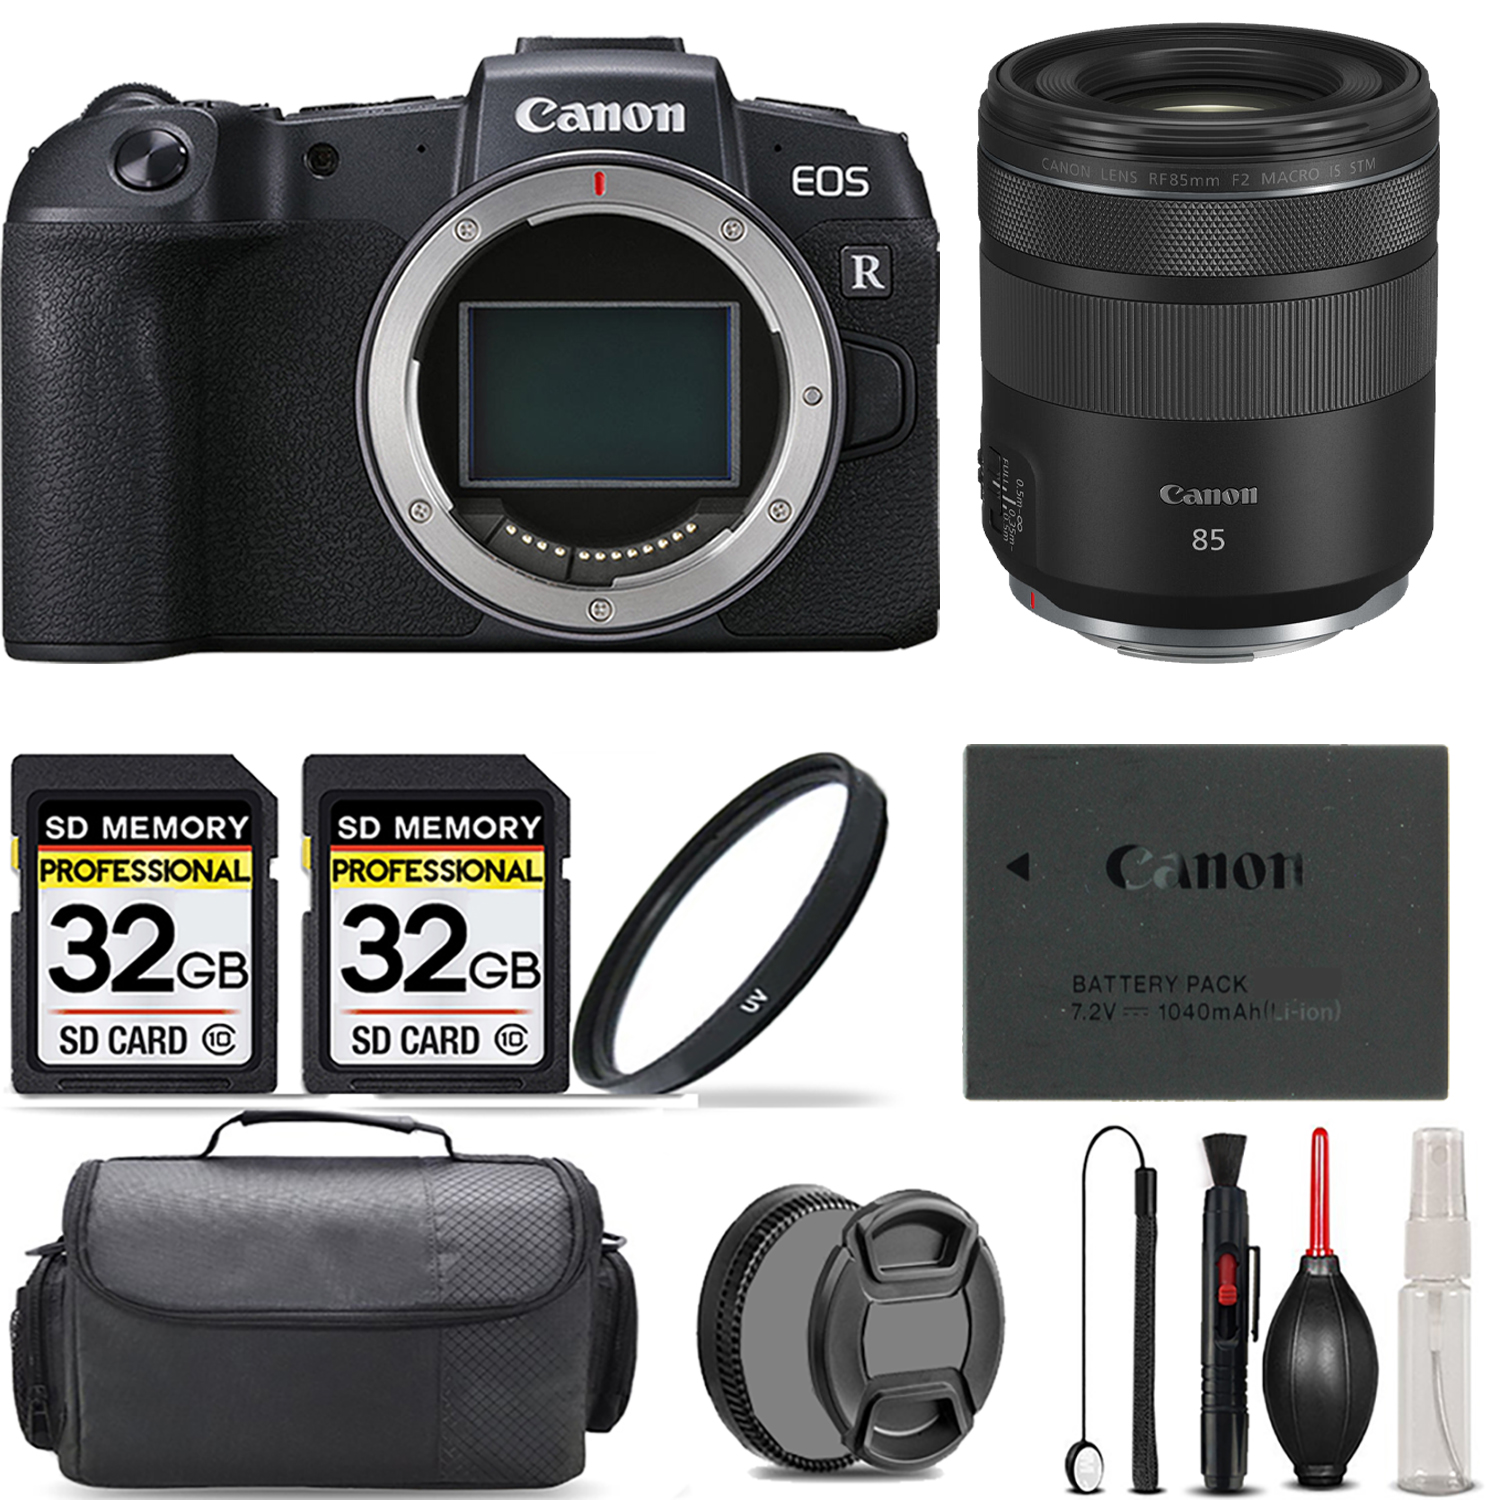 EOS RP Camera + 85mm IS STM Lens + UV Filter + 64GB + Bag & More! *FREE SHIPPING*